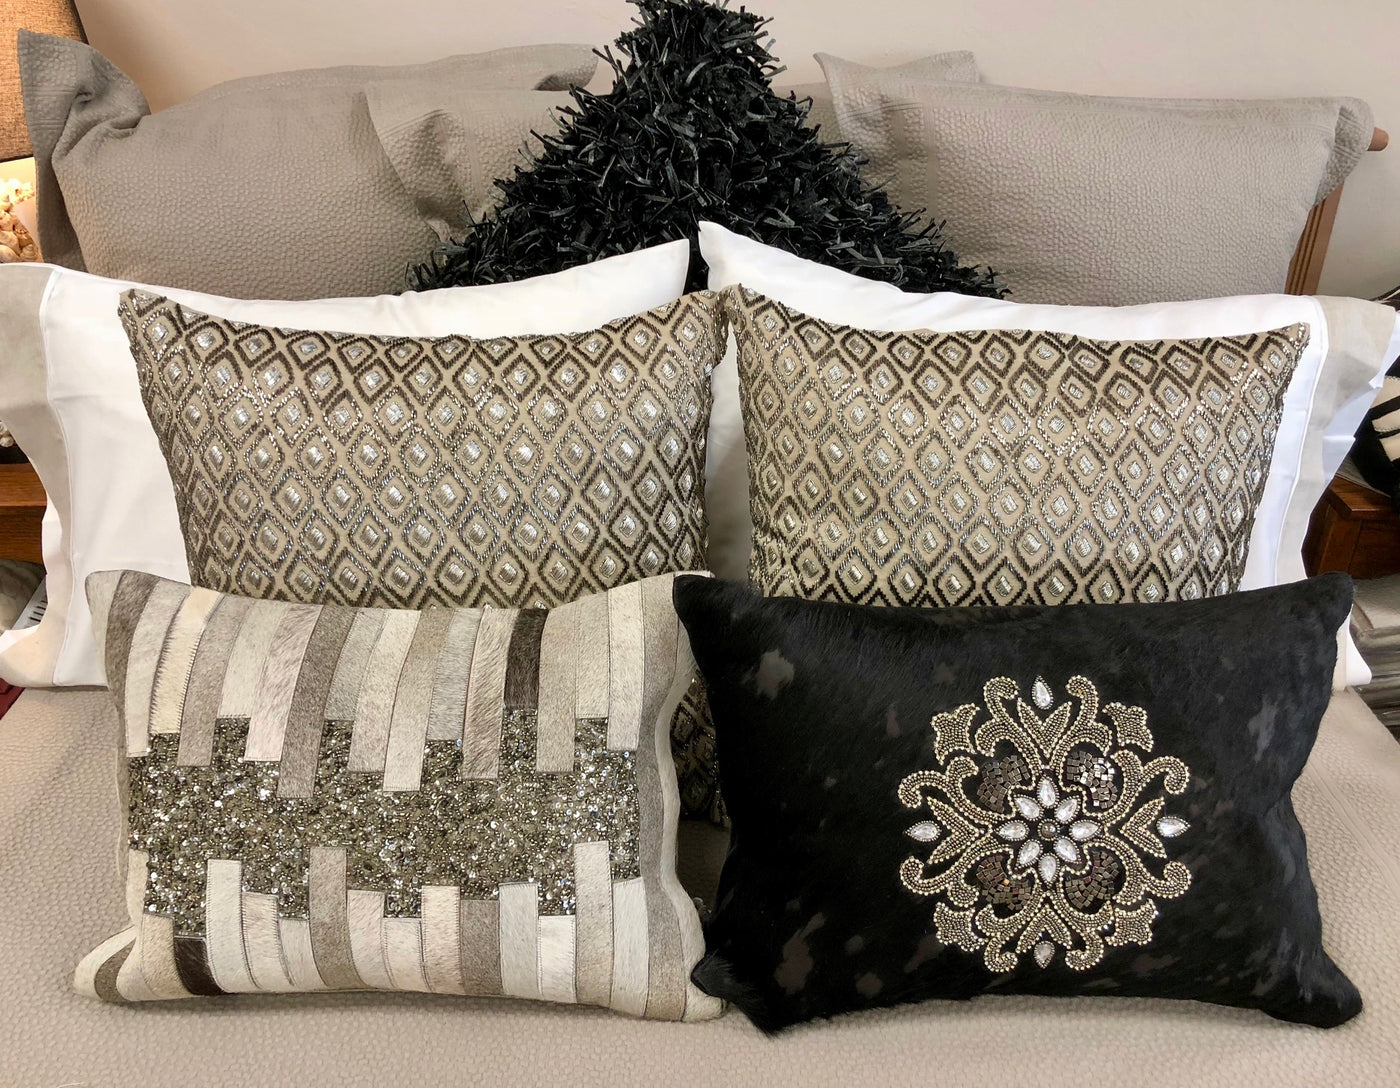 Decorative Pillows...Why?...and How...